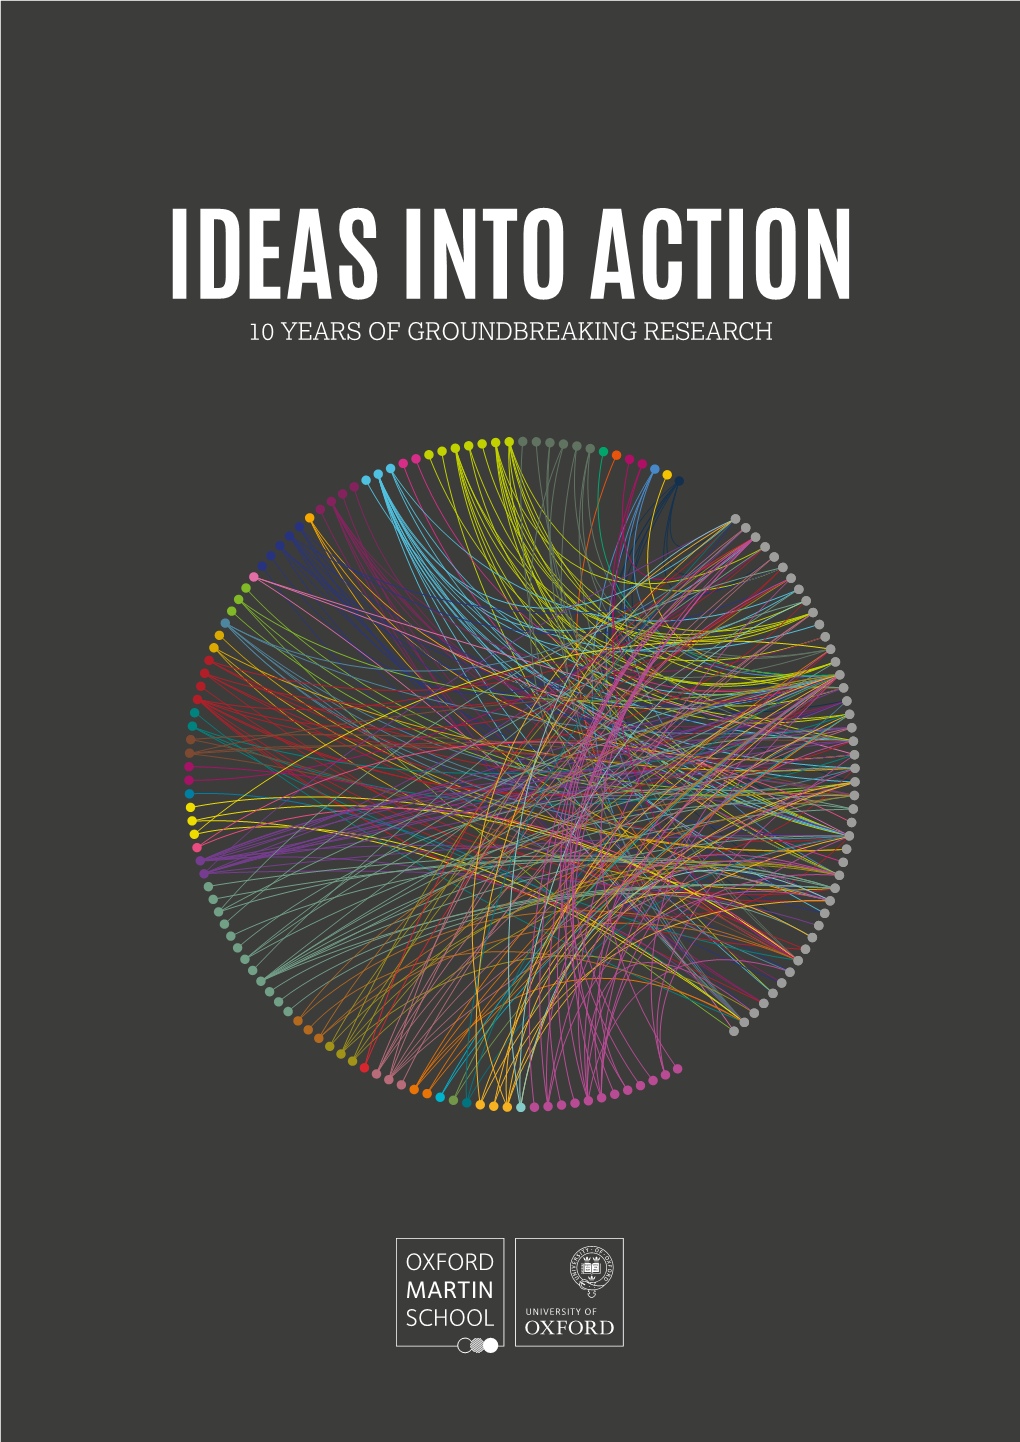 Ideas Into Action 10 Years of Groundbreaking Research Oxford University 10 Years of Ground-Breaking Research 3